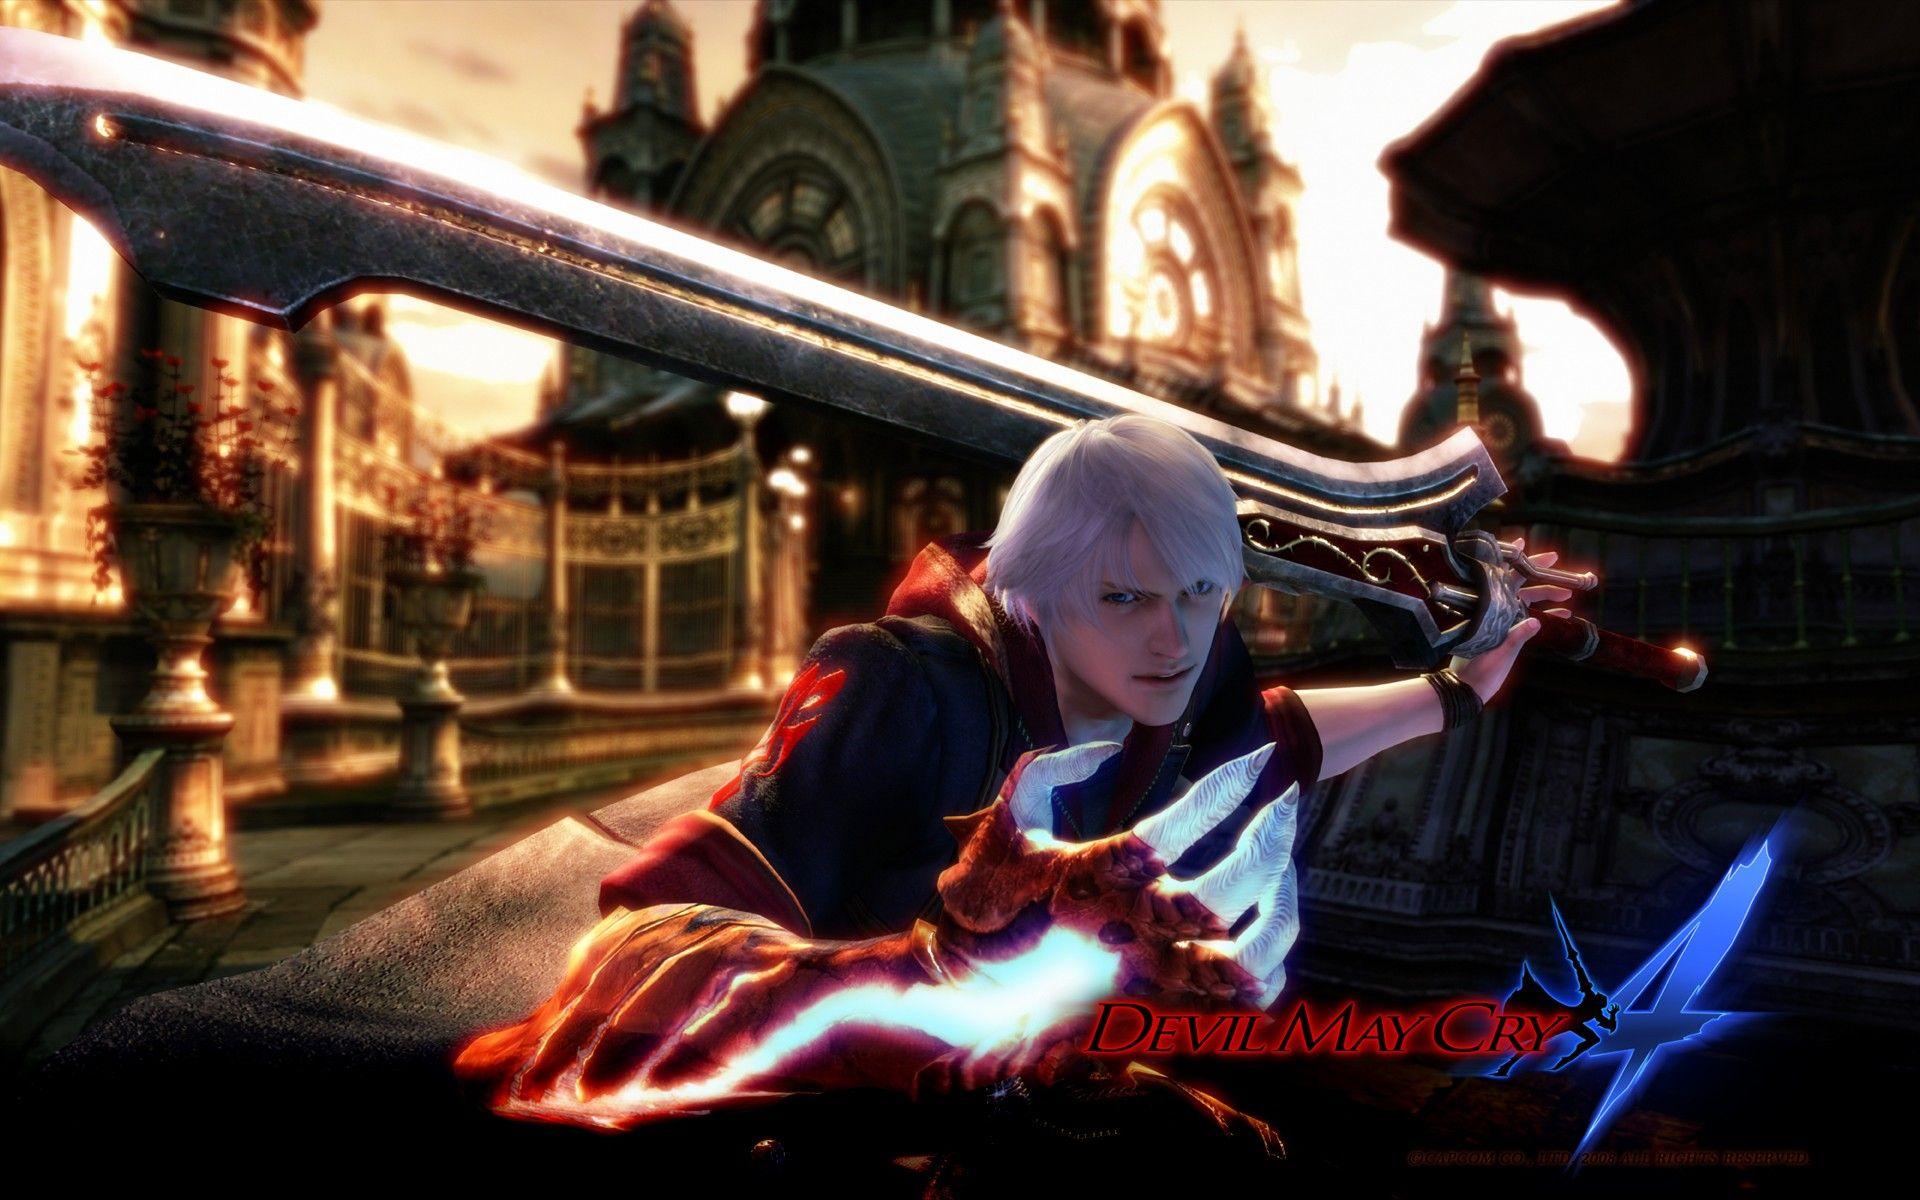 Devil May Cry Wallpaper High Quality